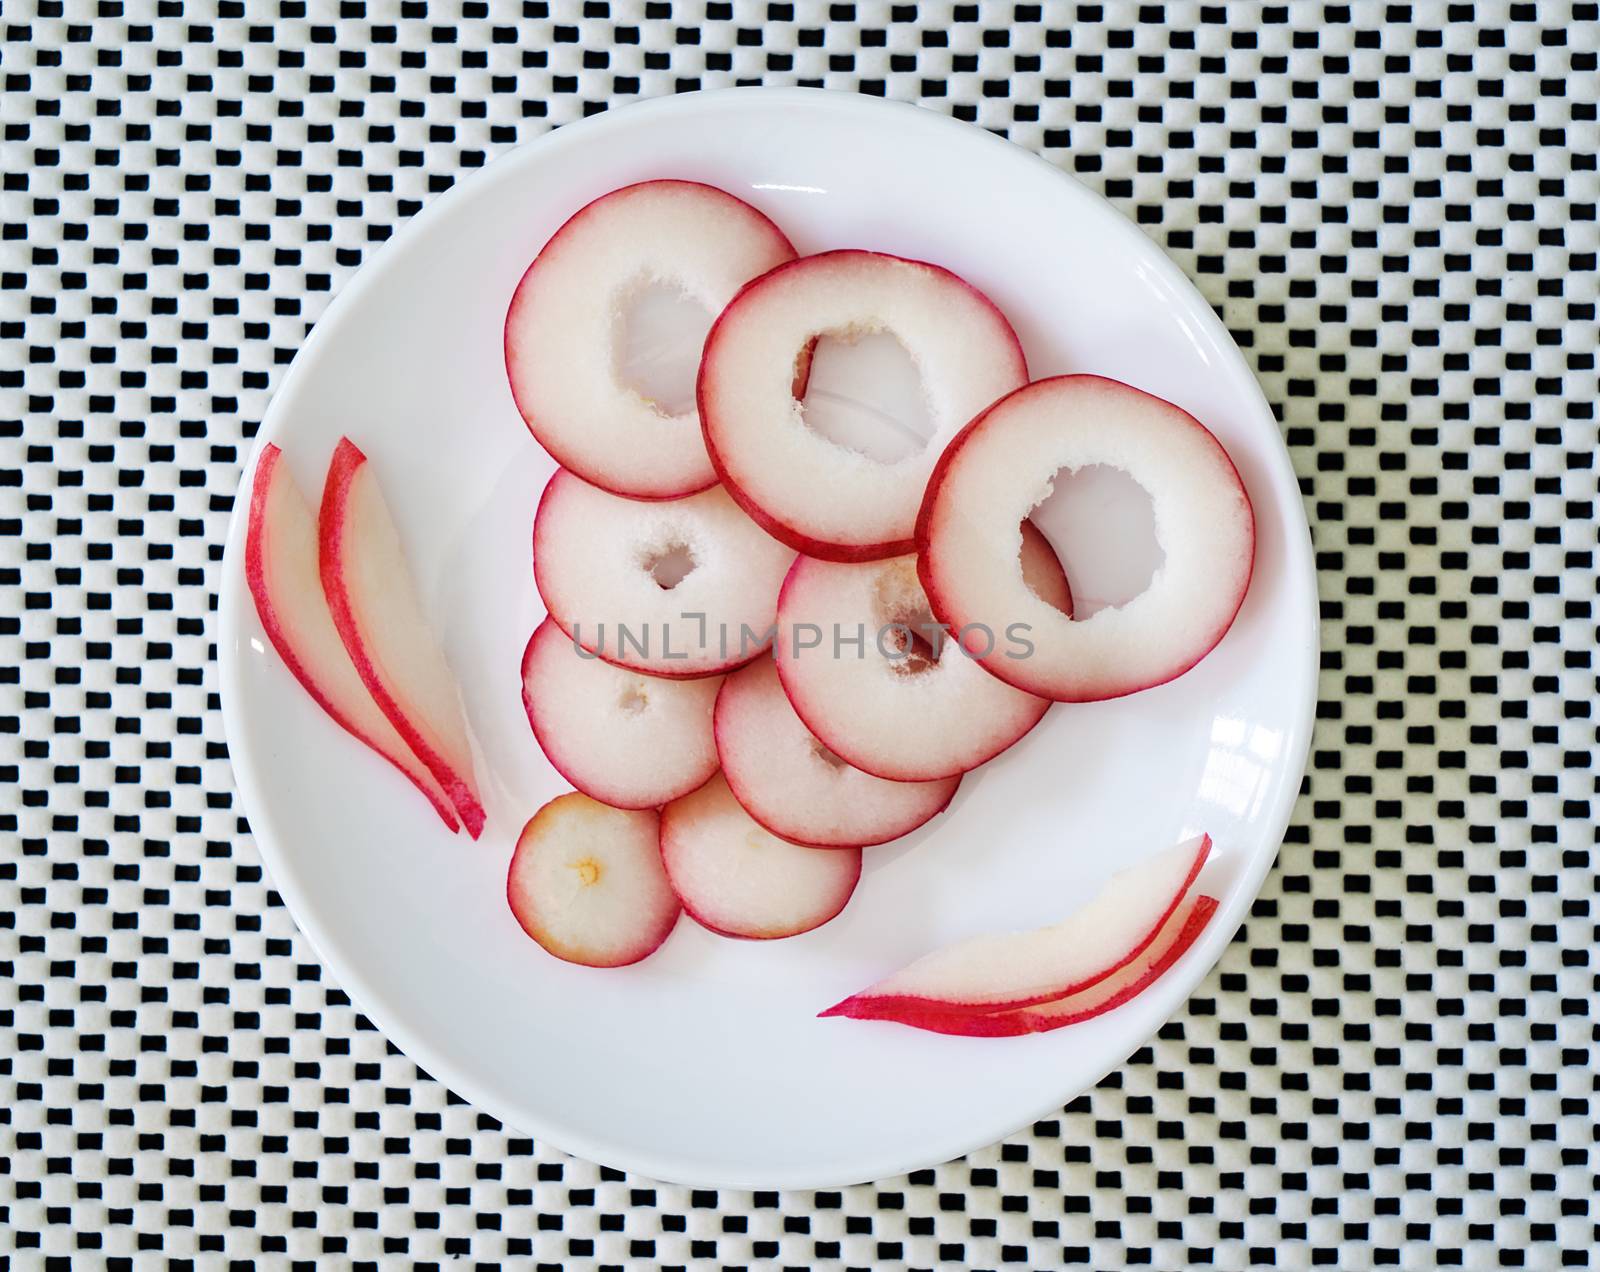 Slices of rose fruit in a plate on a white surface